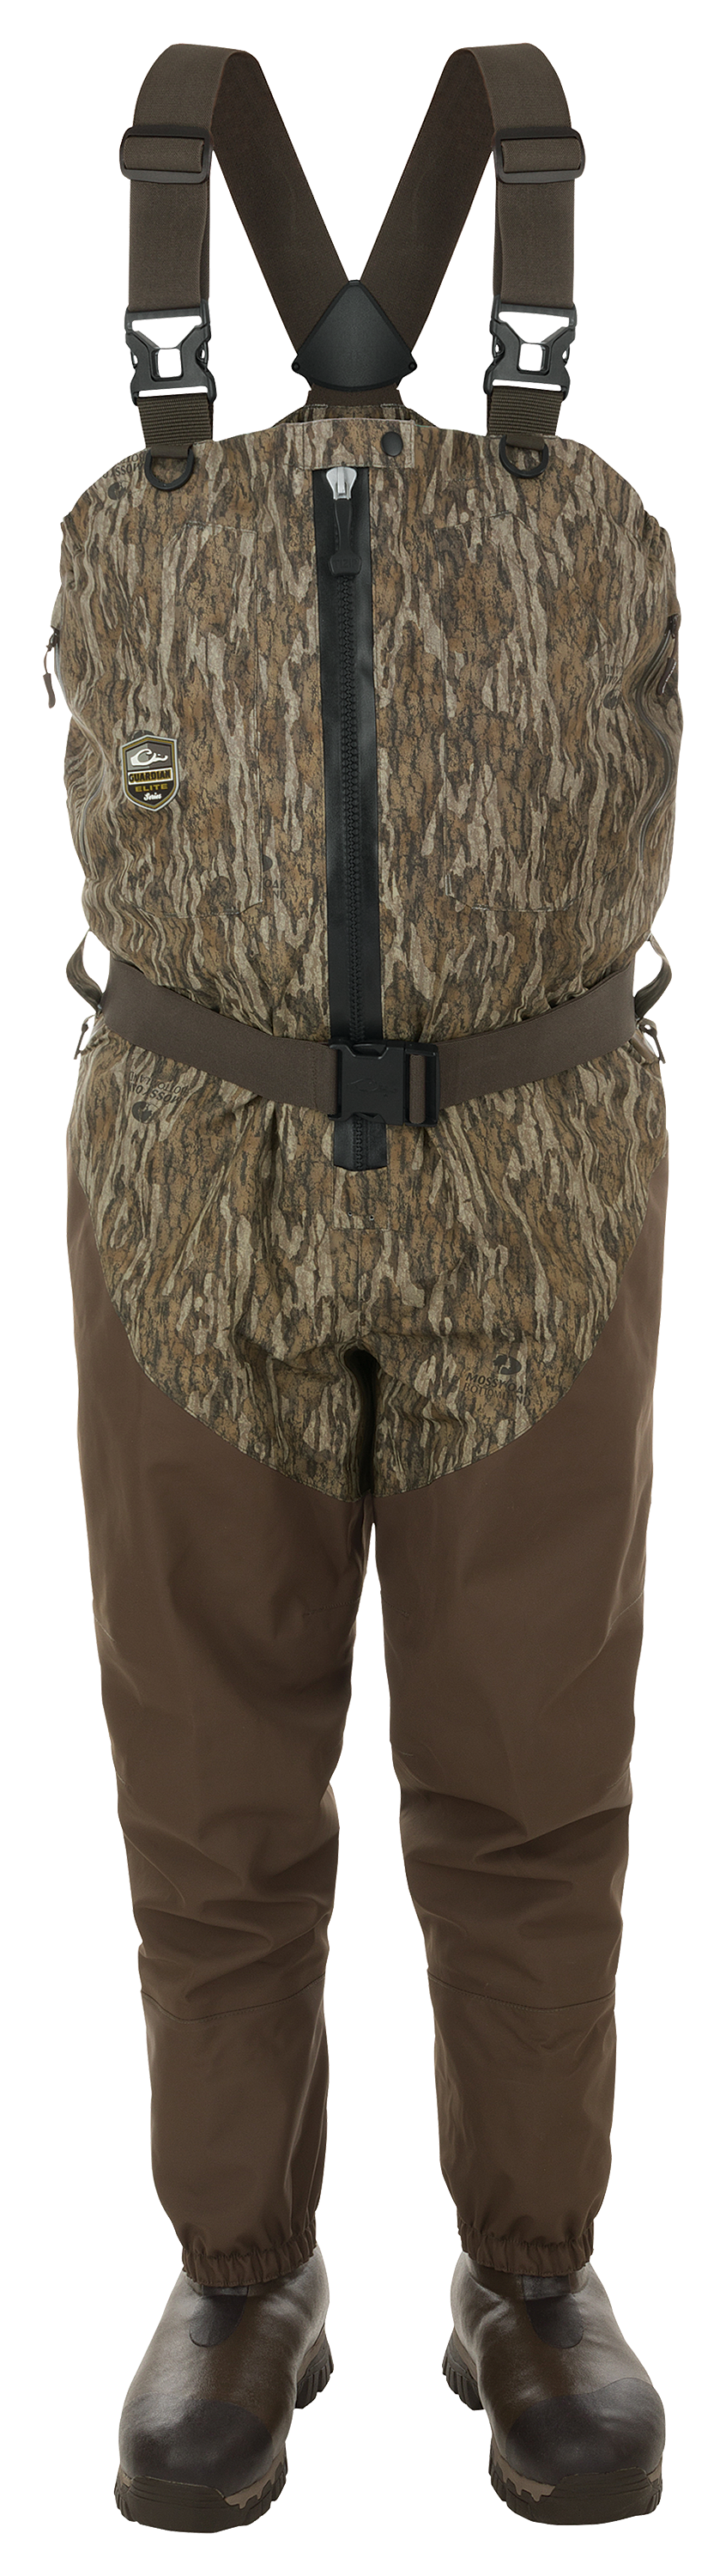 Drake Waterfowl Systems Guardian Elite Front Zip Breathable Waders for Men - Mossy Oak Bottomland - 8/Medium